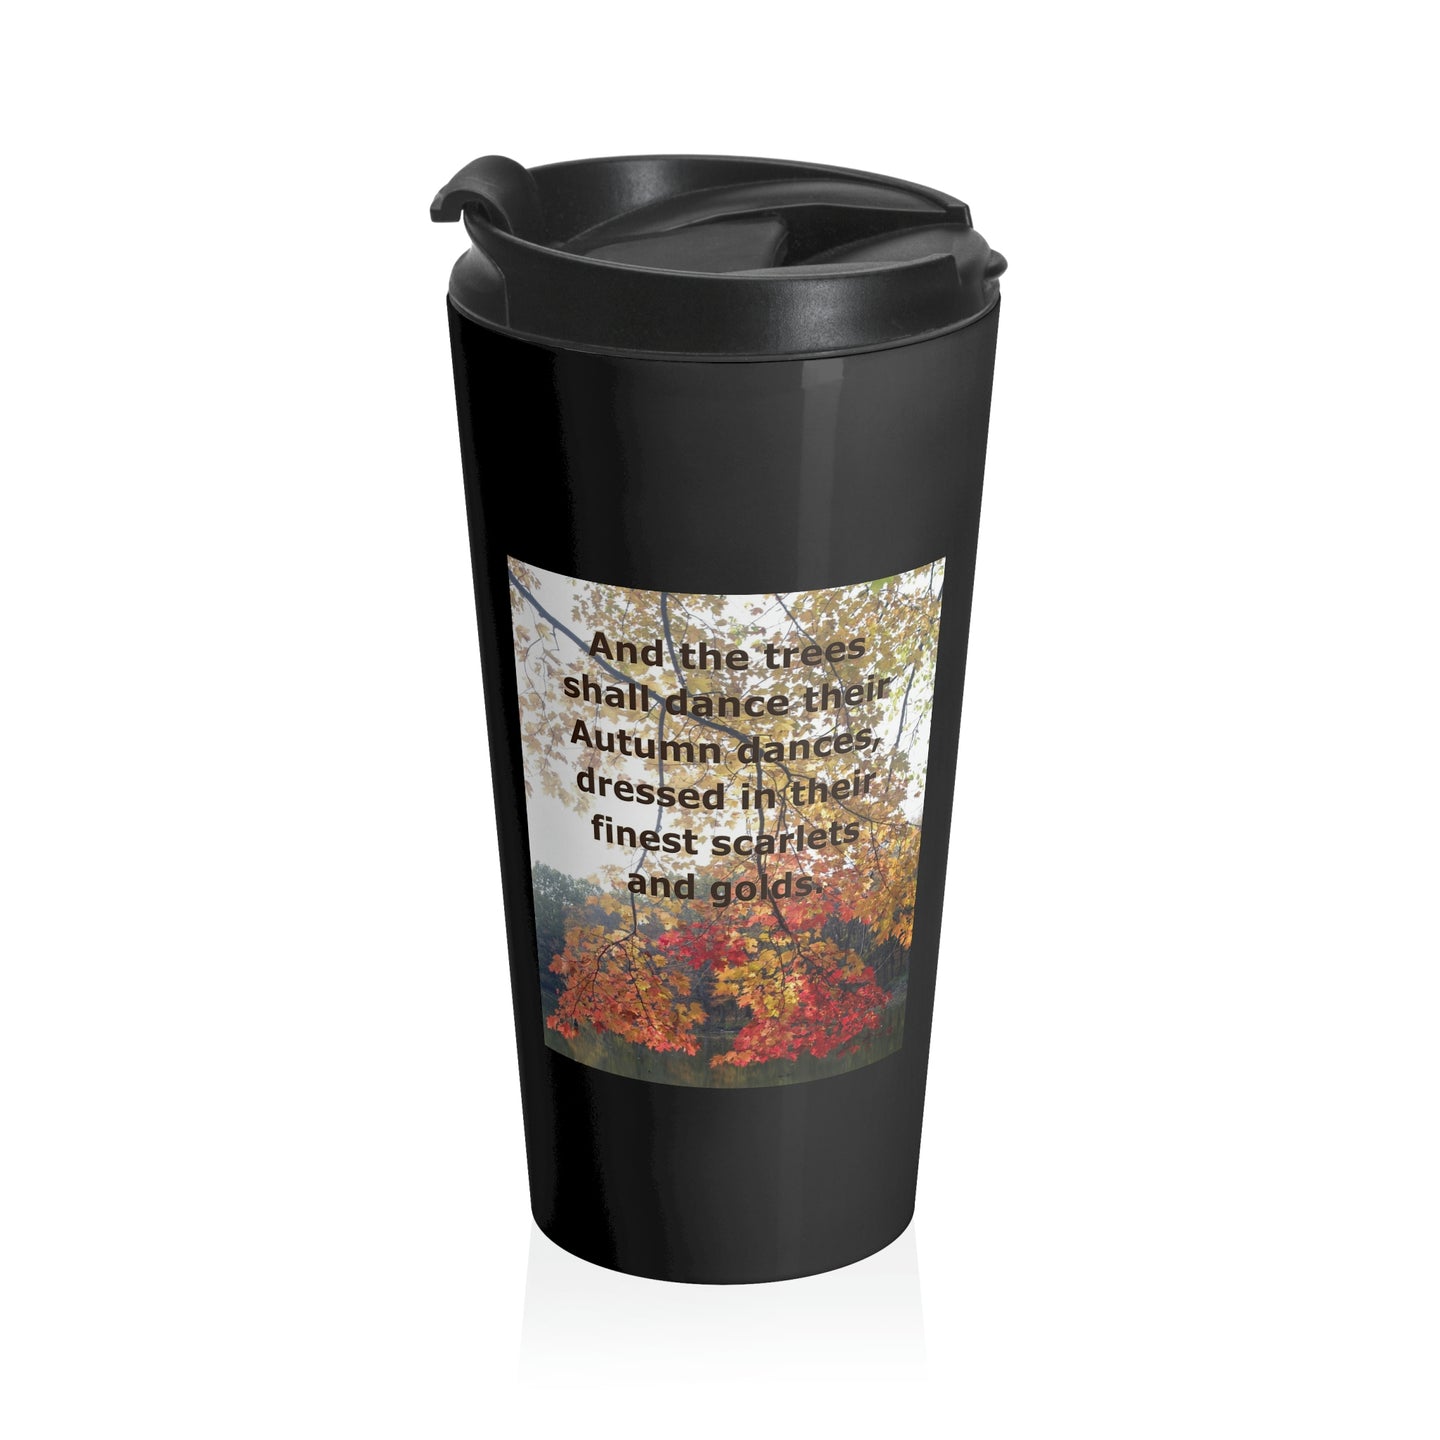 And the trees shall dance their Autumn dances... | Inspirational Motivational Quote Stainless Steel Travel Mug | 15oz | Black | Fall Leaves